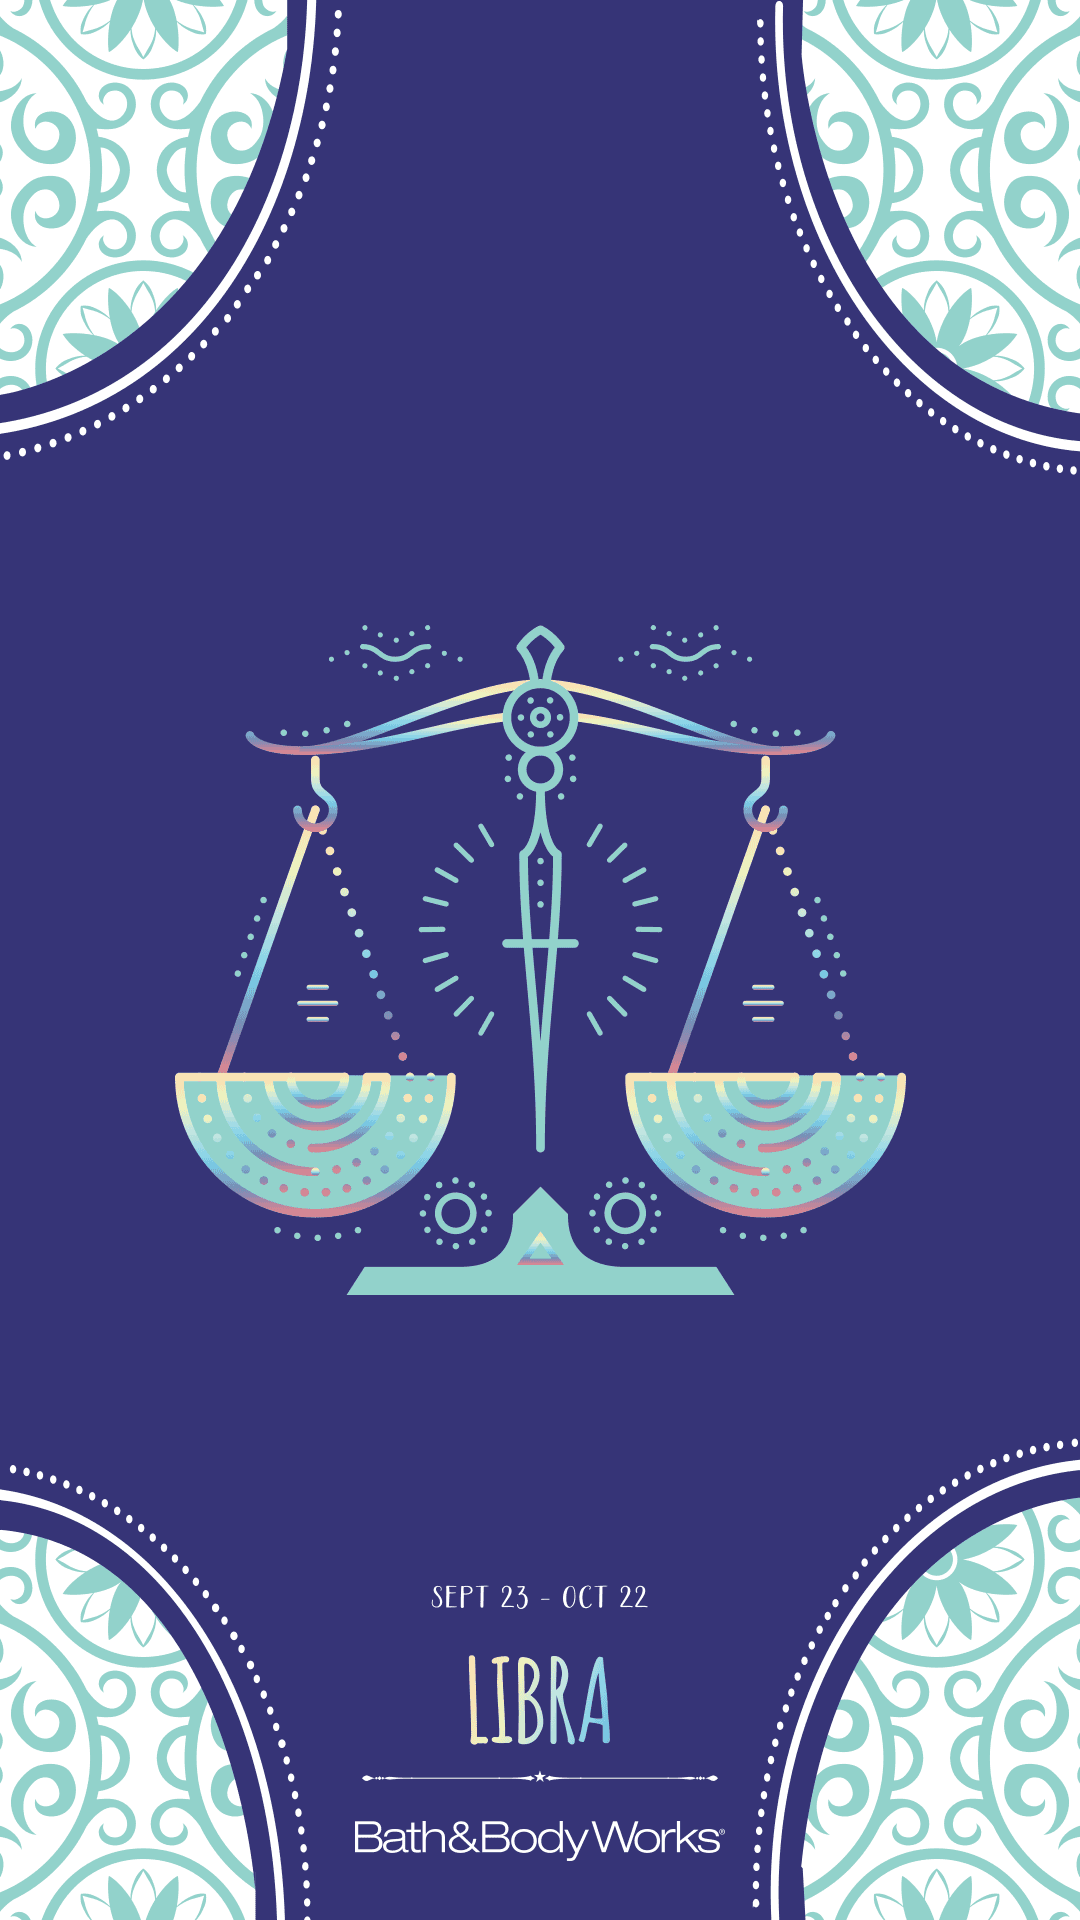 A banner for Libra with a graphic of a balanced weight scale on a blue background. - Libra